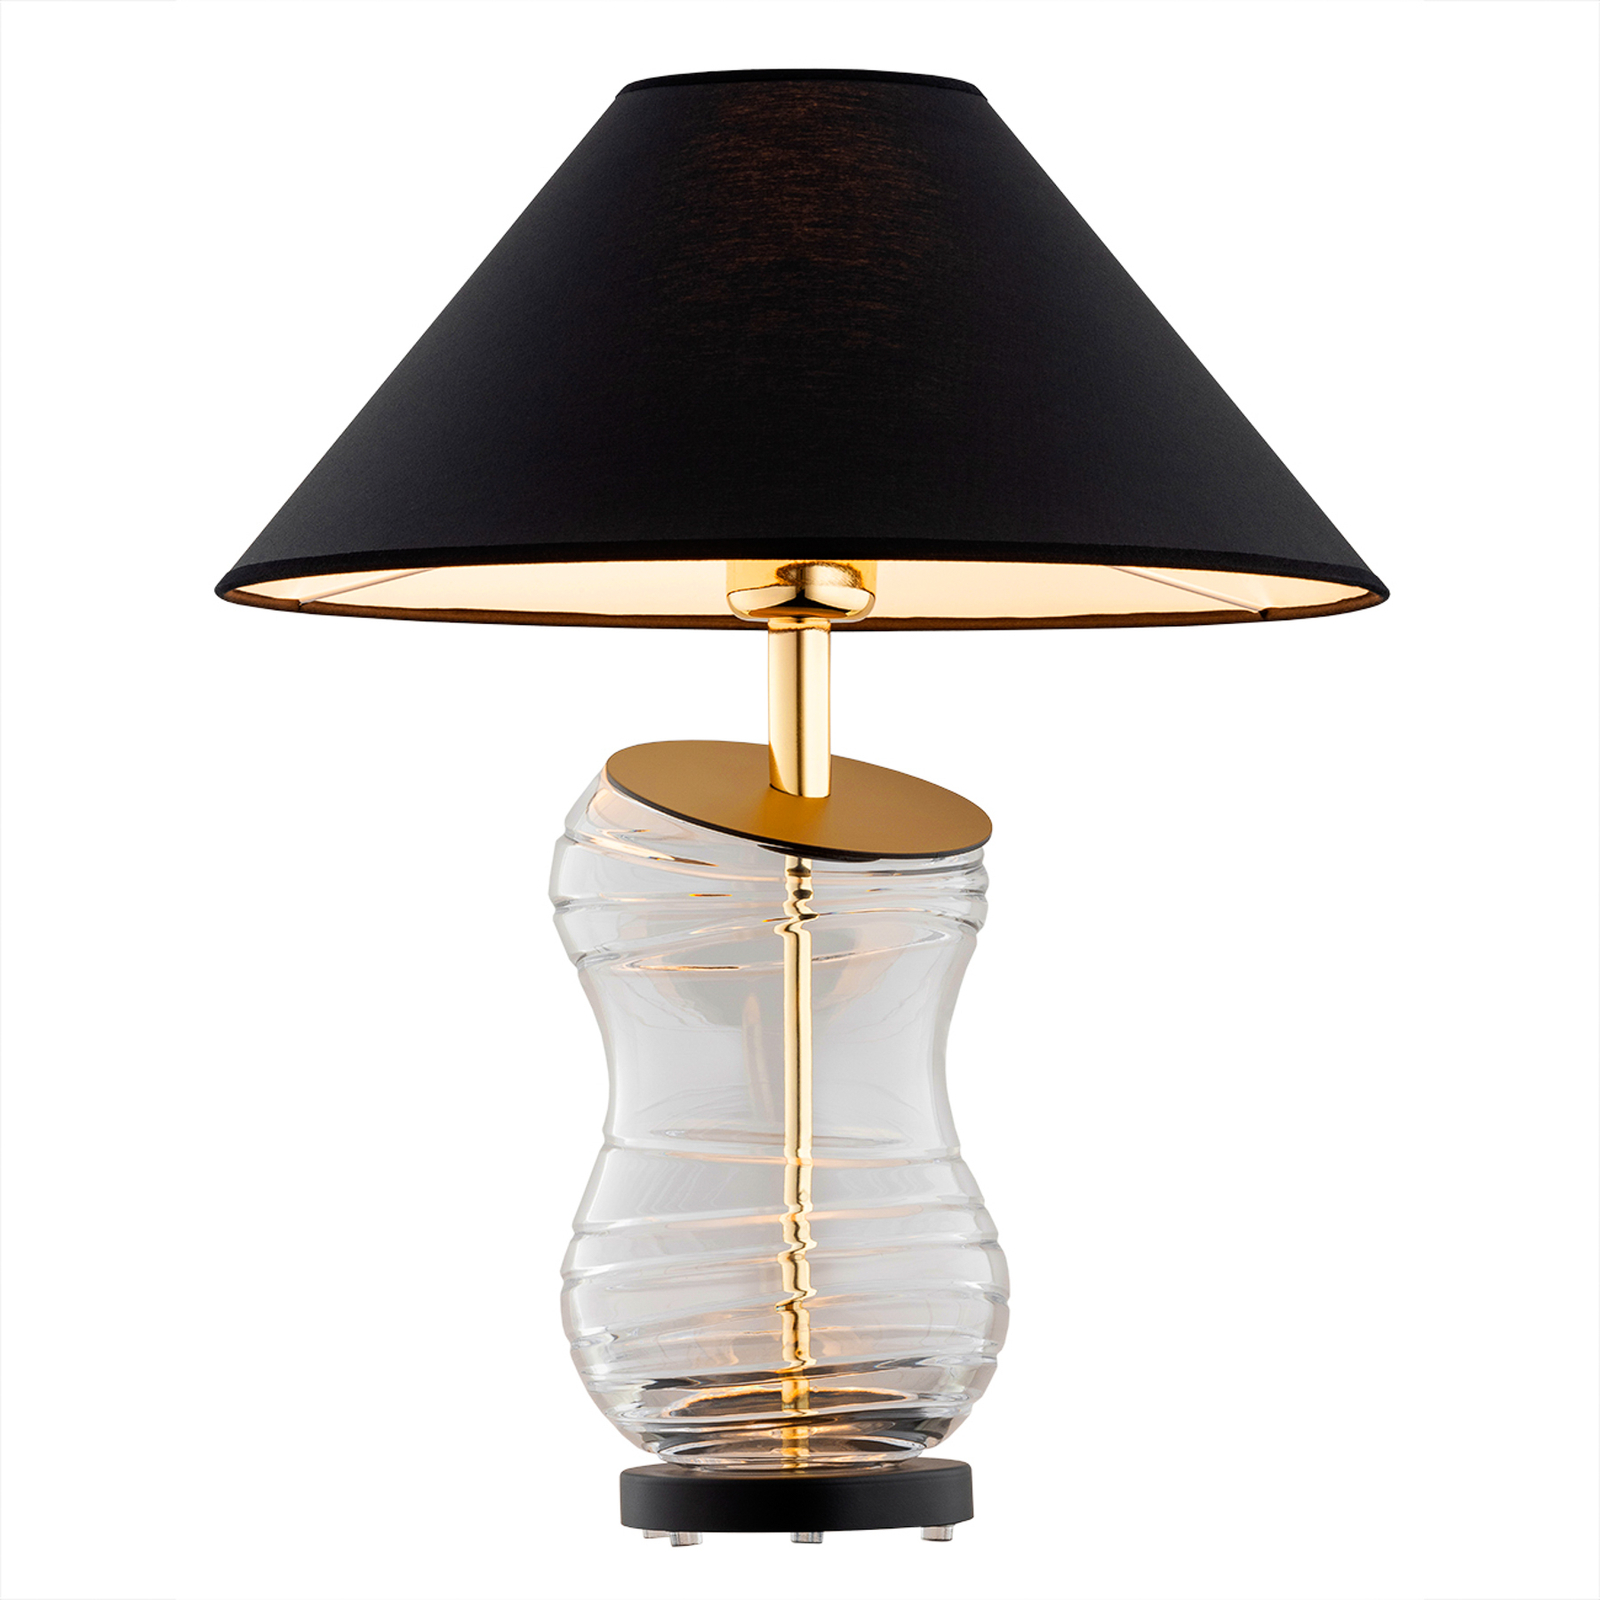 Veneto table lamp with textile shade in black